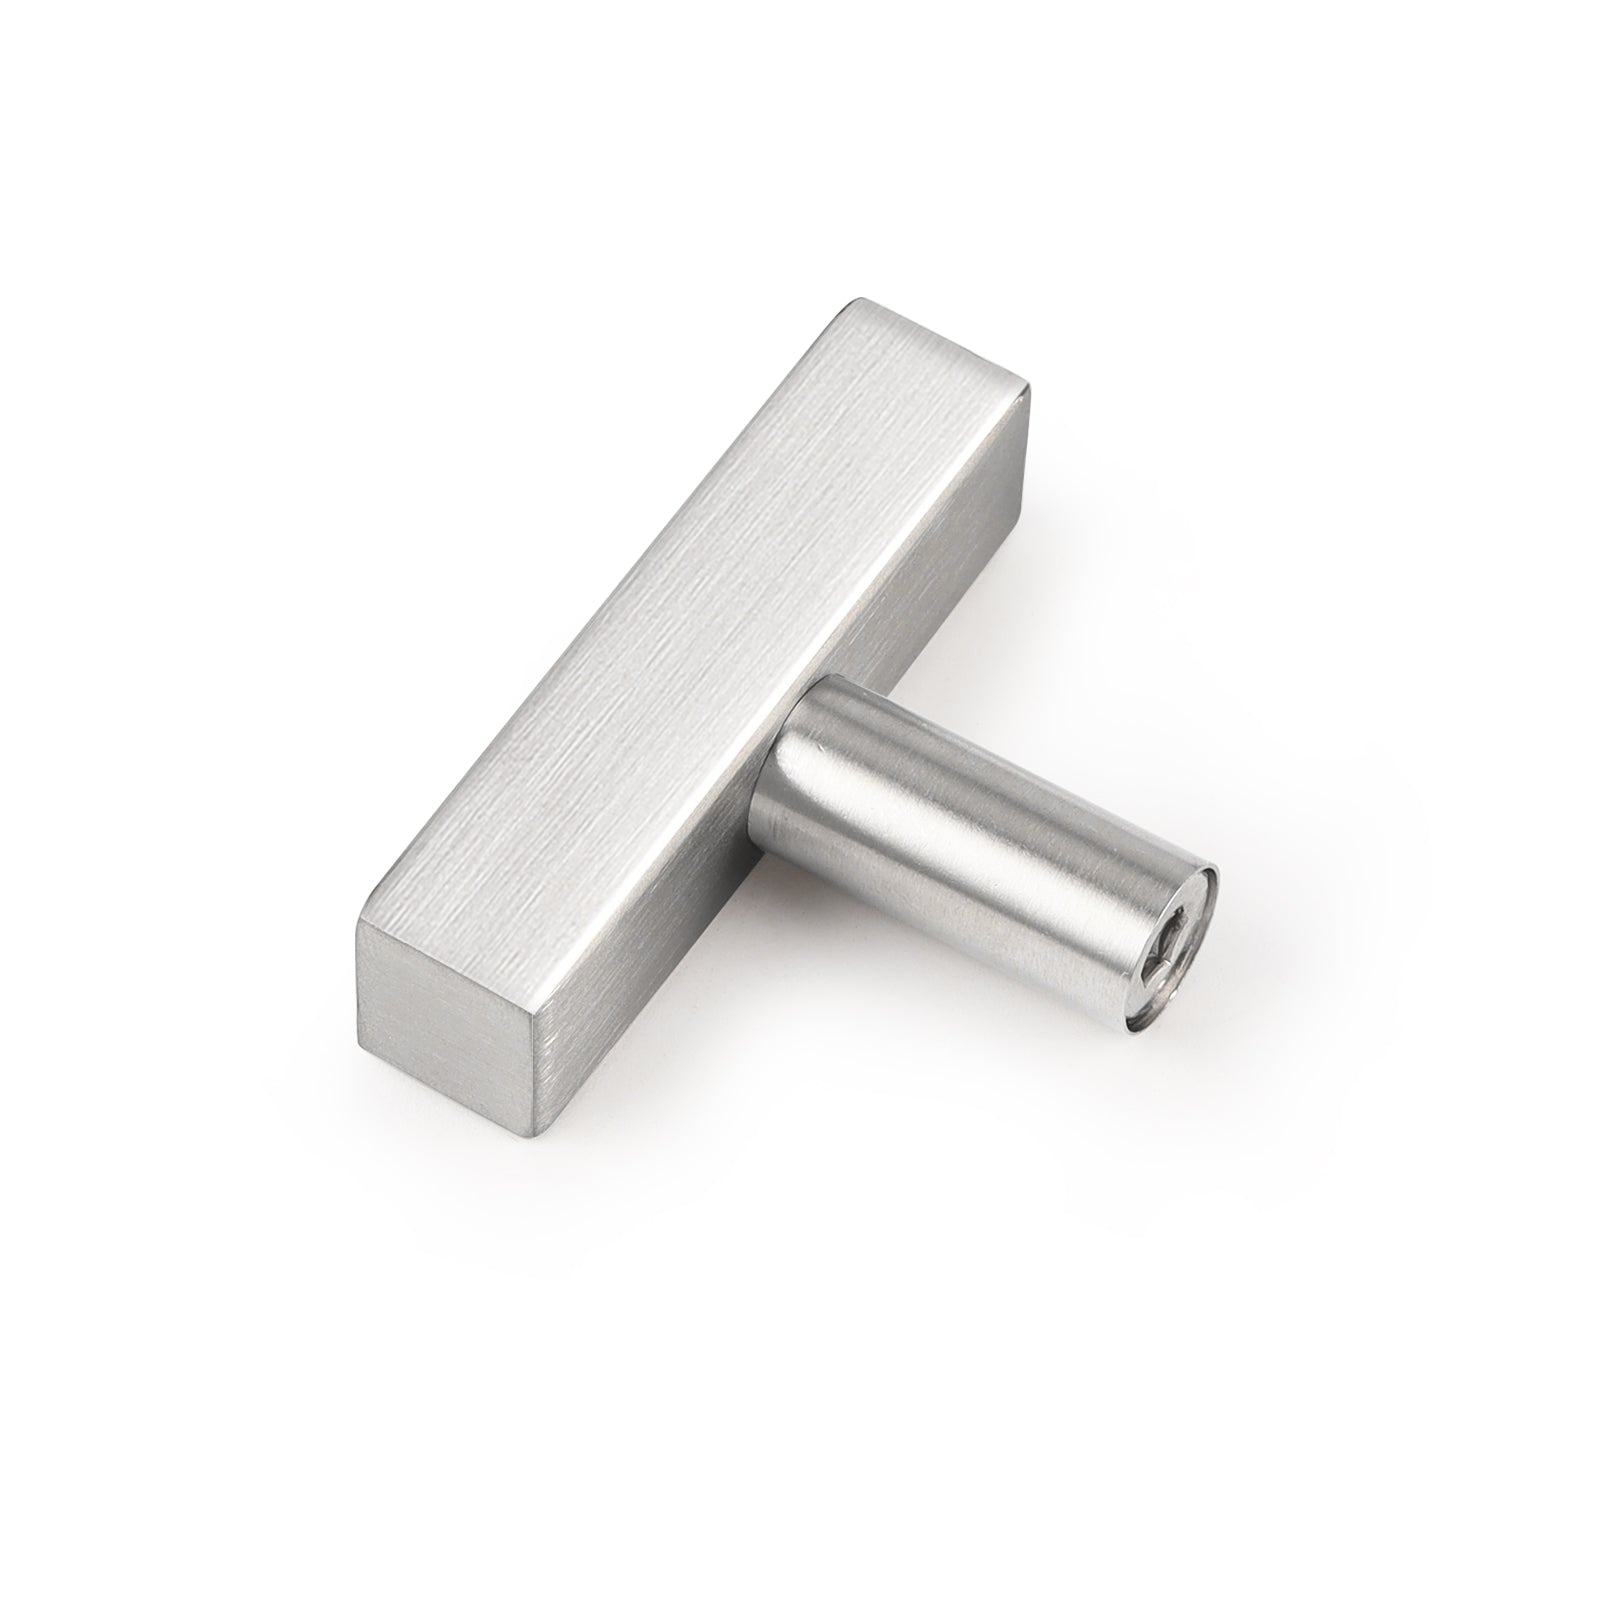 Stainless Steel Cabinet Pulls 2-10 Hole Centers Square T Bar Handles -  Probrico